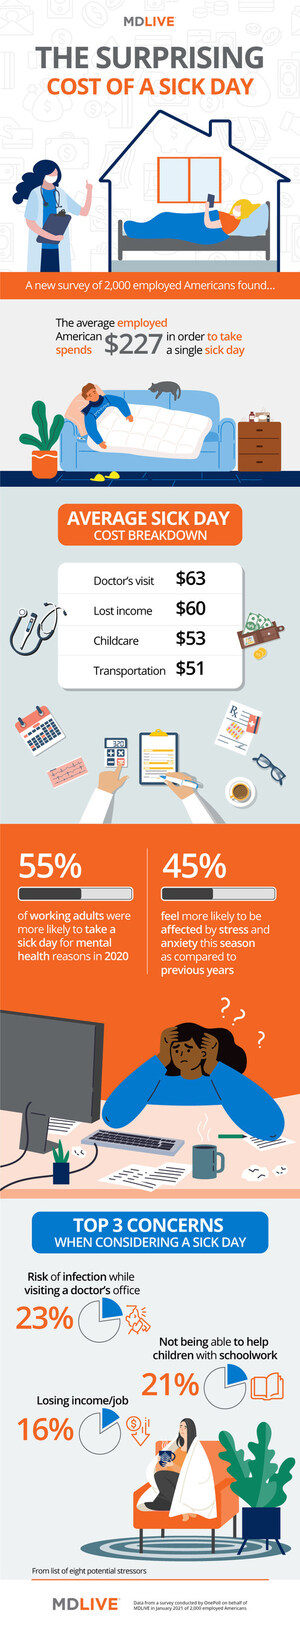 New Research Shows Financial And Emotional Costs Of Taking A Sick Day Surging Among U.S. Workers